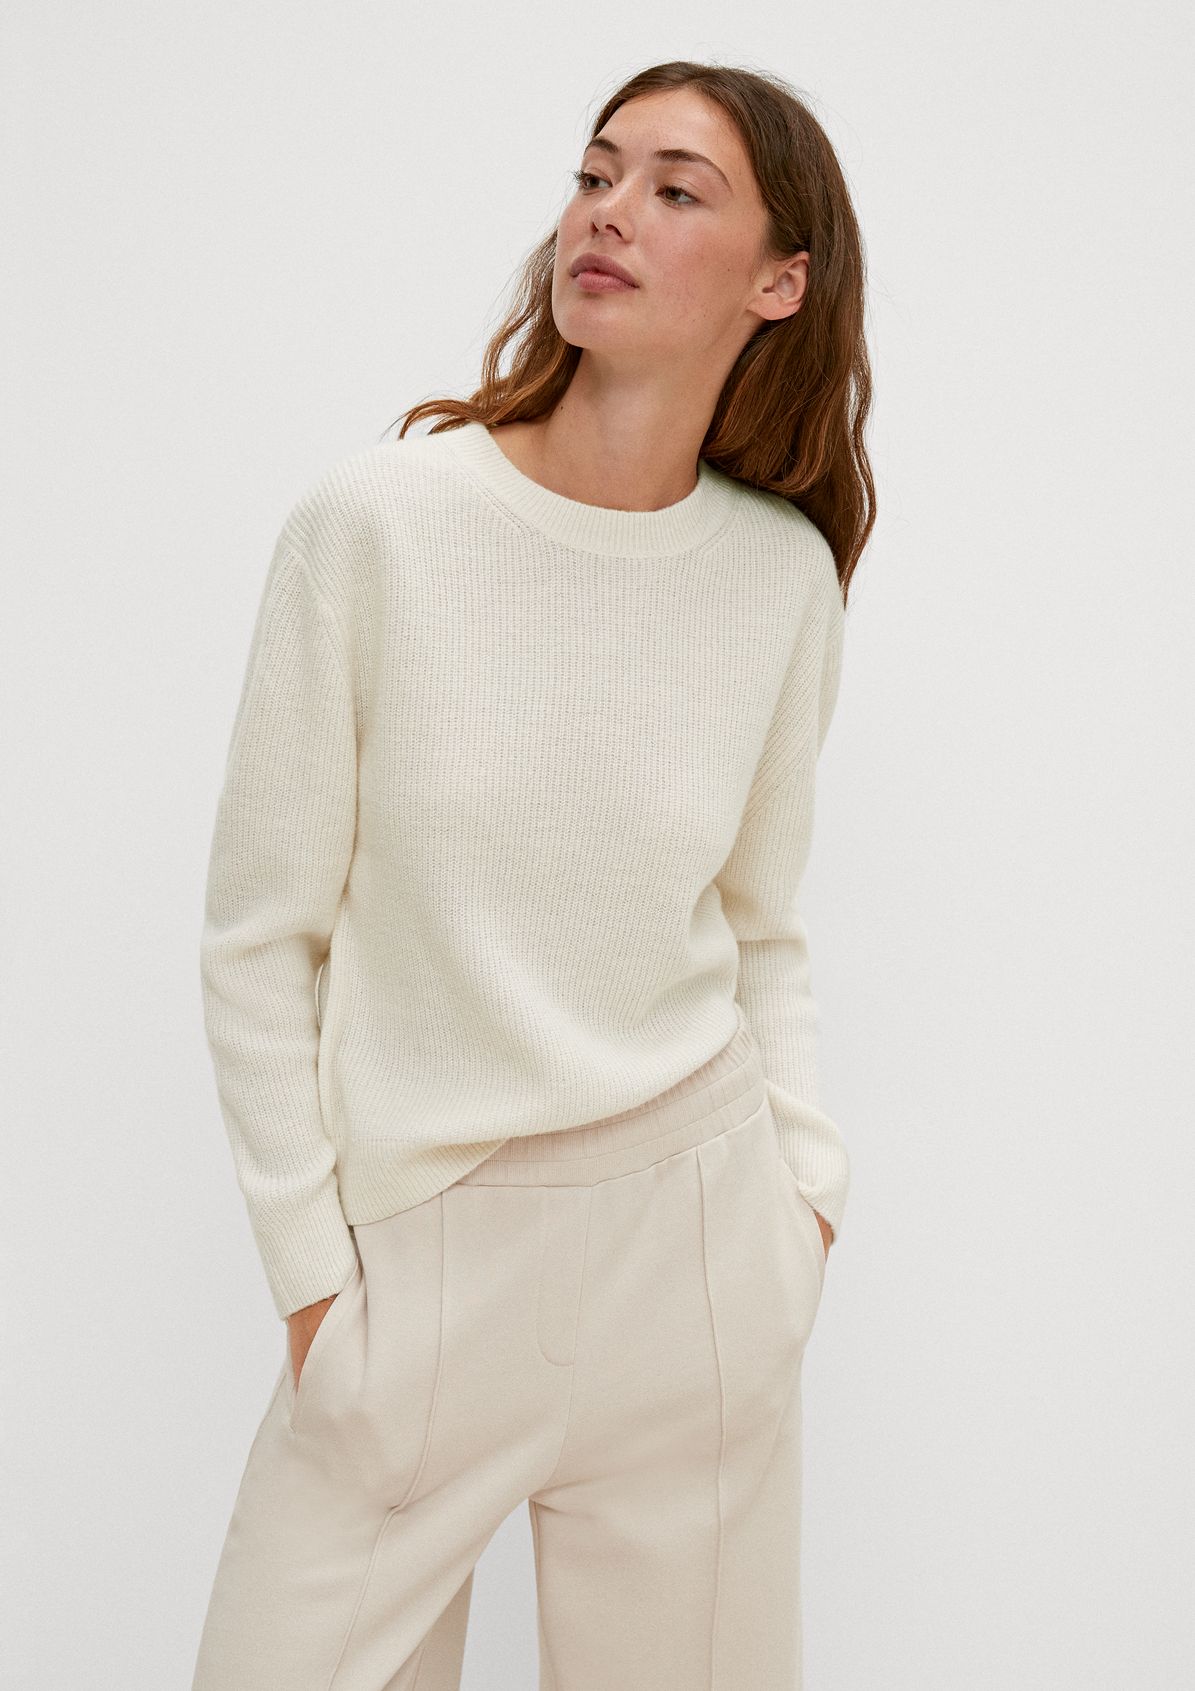 Soft jumper in a wool blend from comma